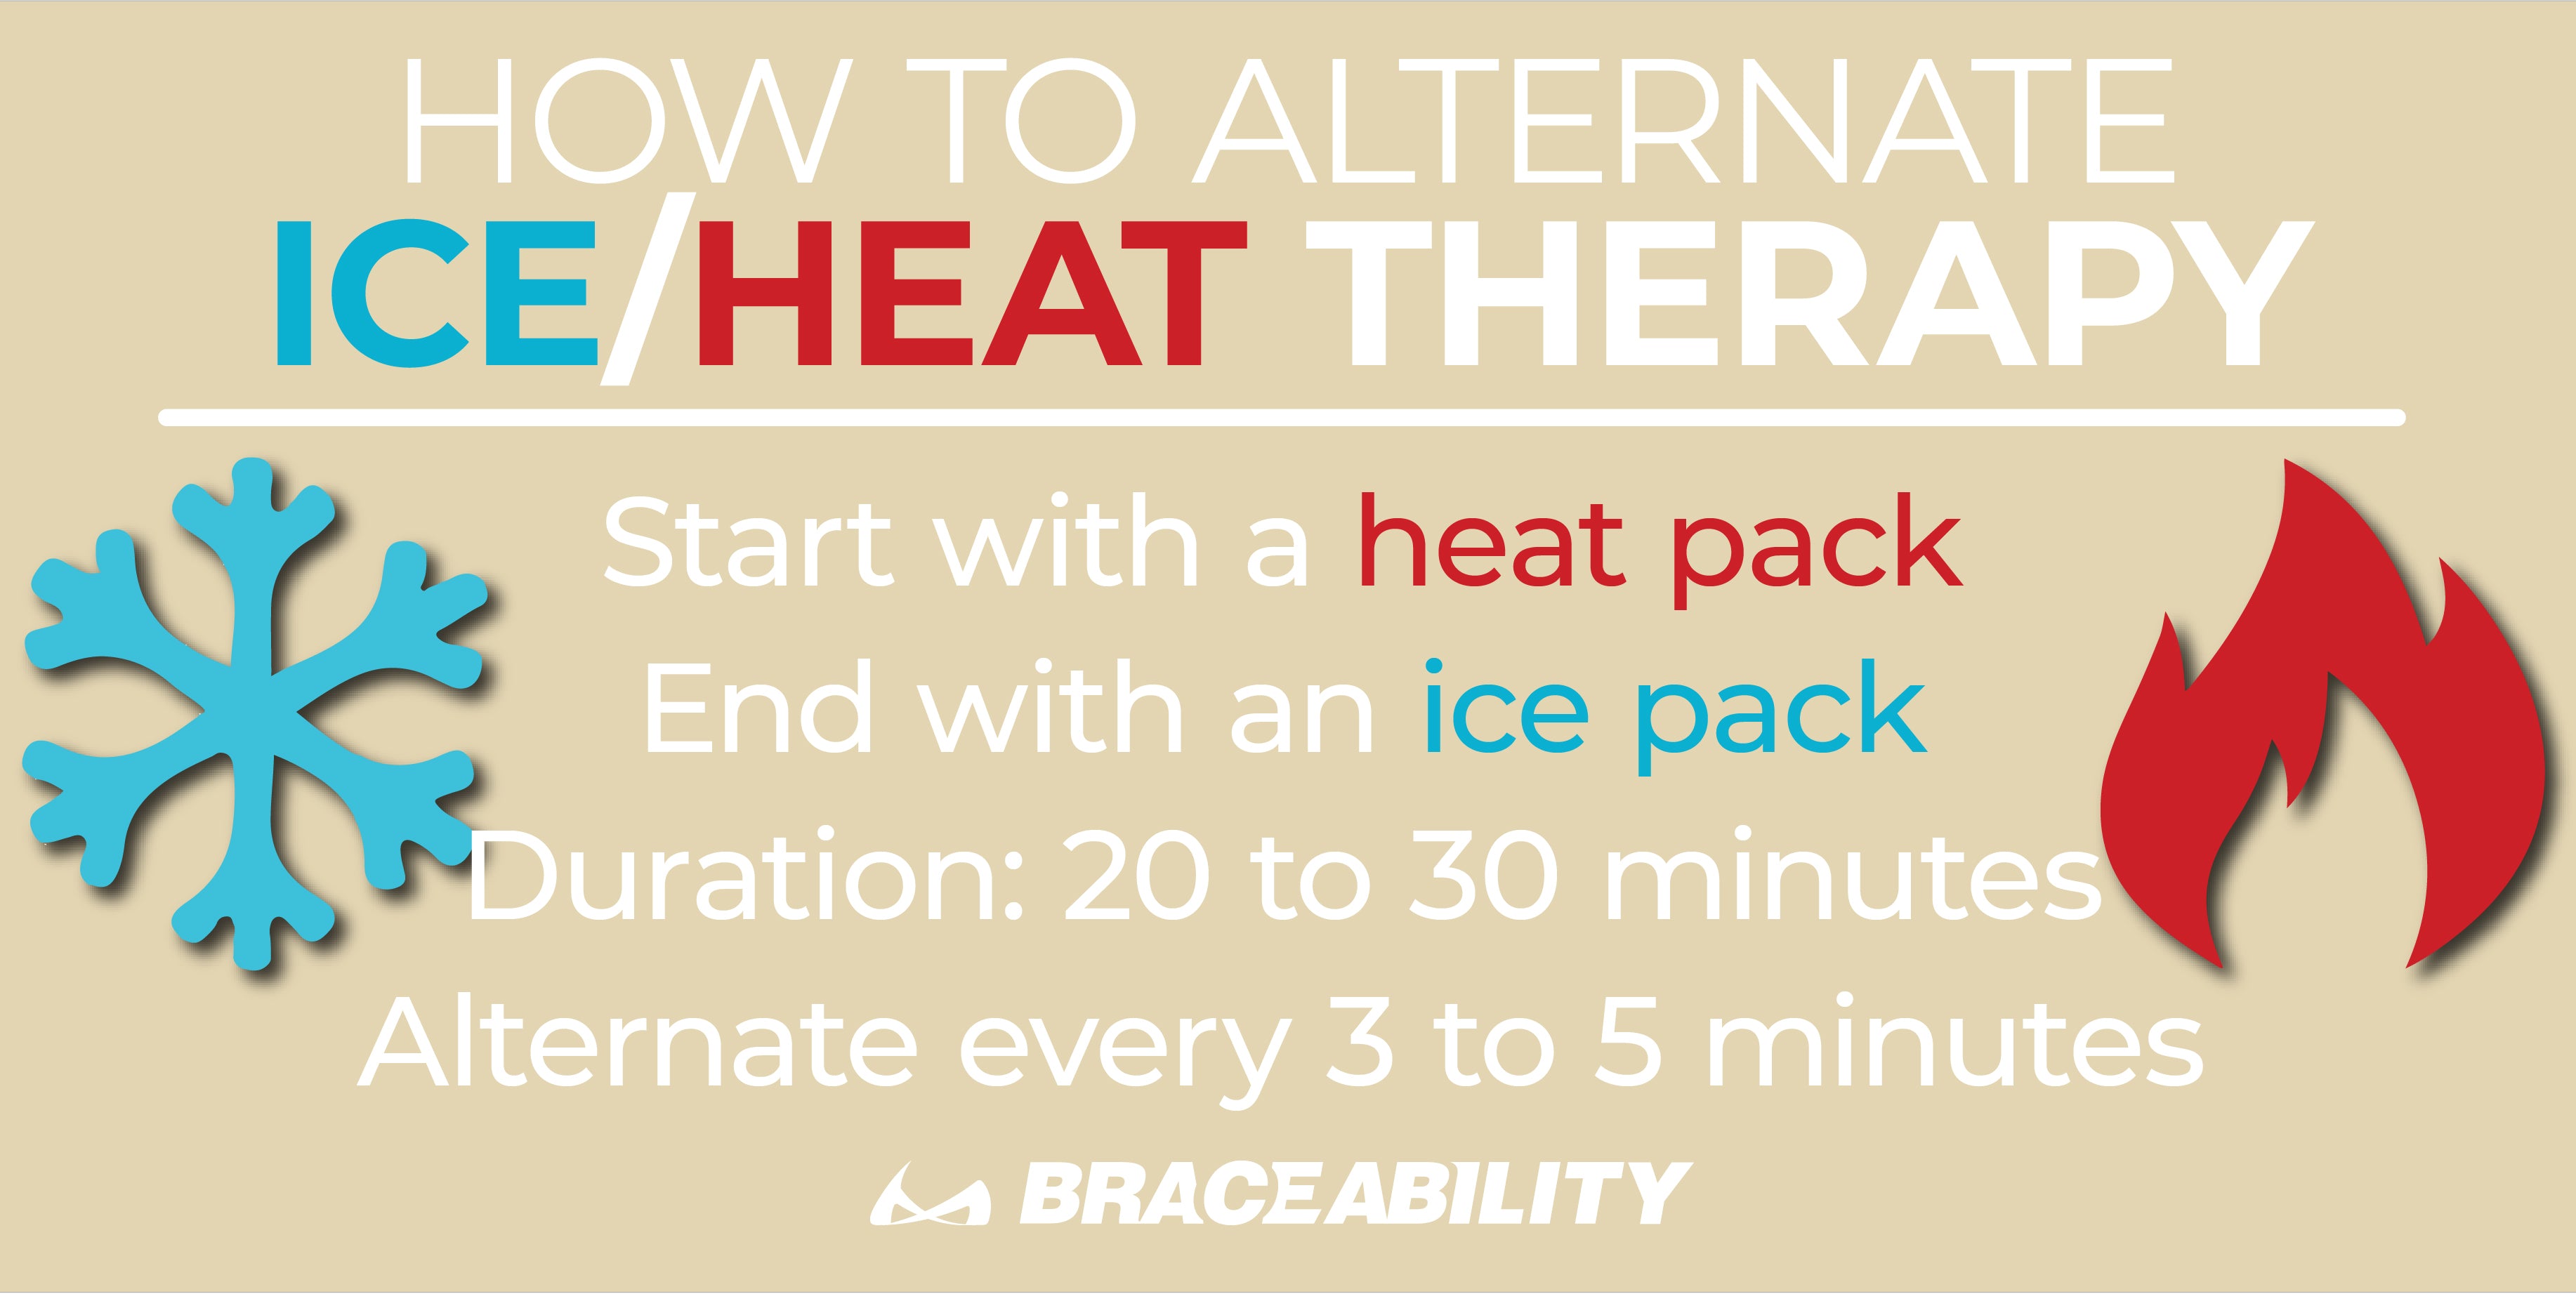 use ice and heat therapy alternating to relieve plantar fasciitis and arthritis